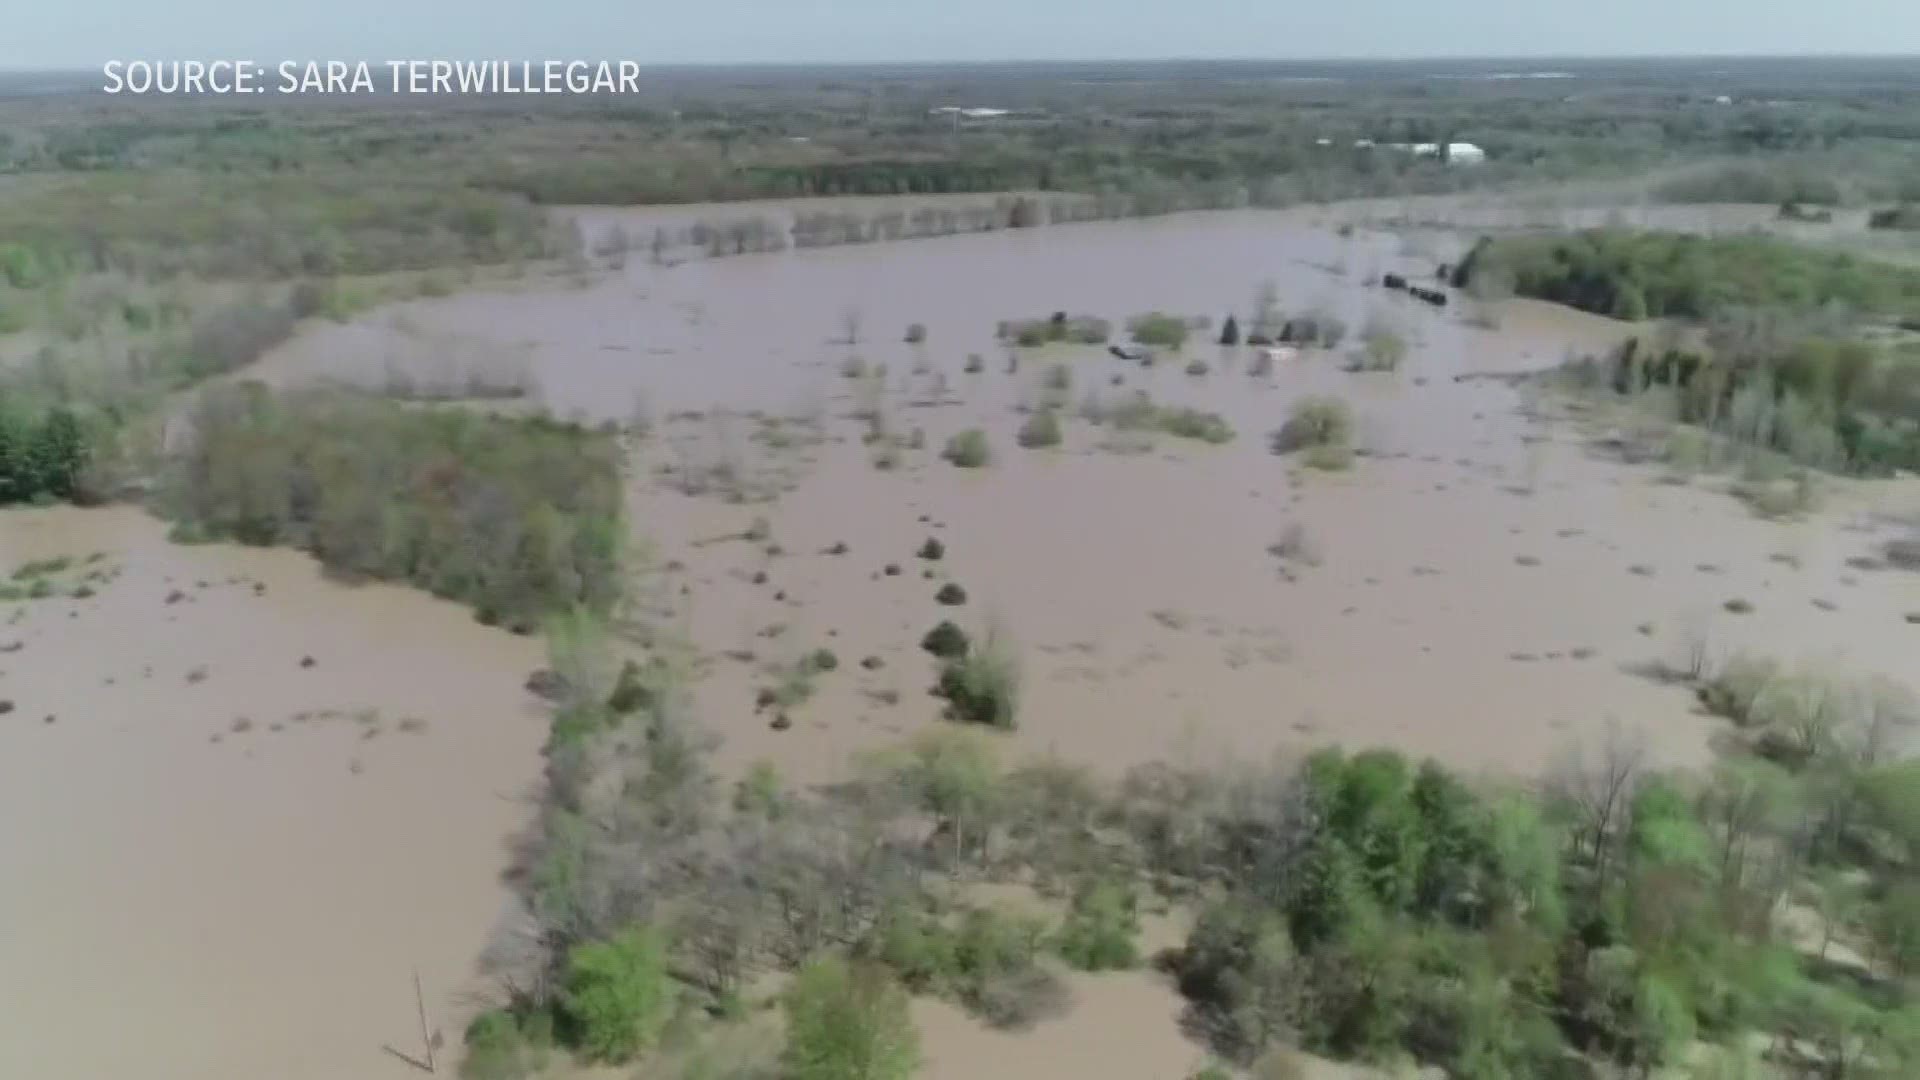 Midland residents evacuated after historic flooding hit early this week.